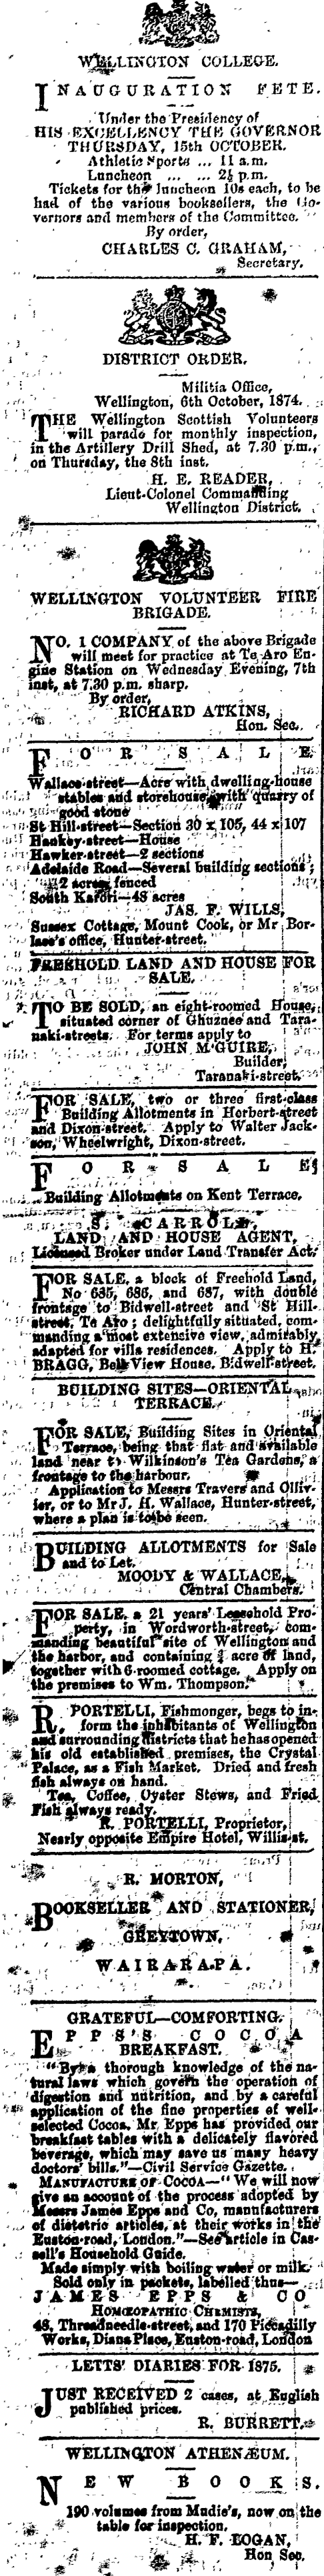 Papers Past Newspapers Evening Post 7 October 1874 Page 3 Advertisements Column 1